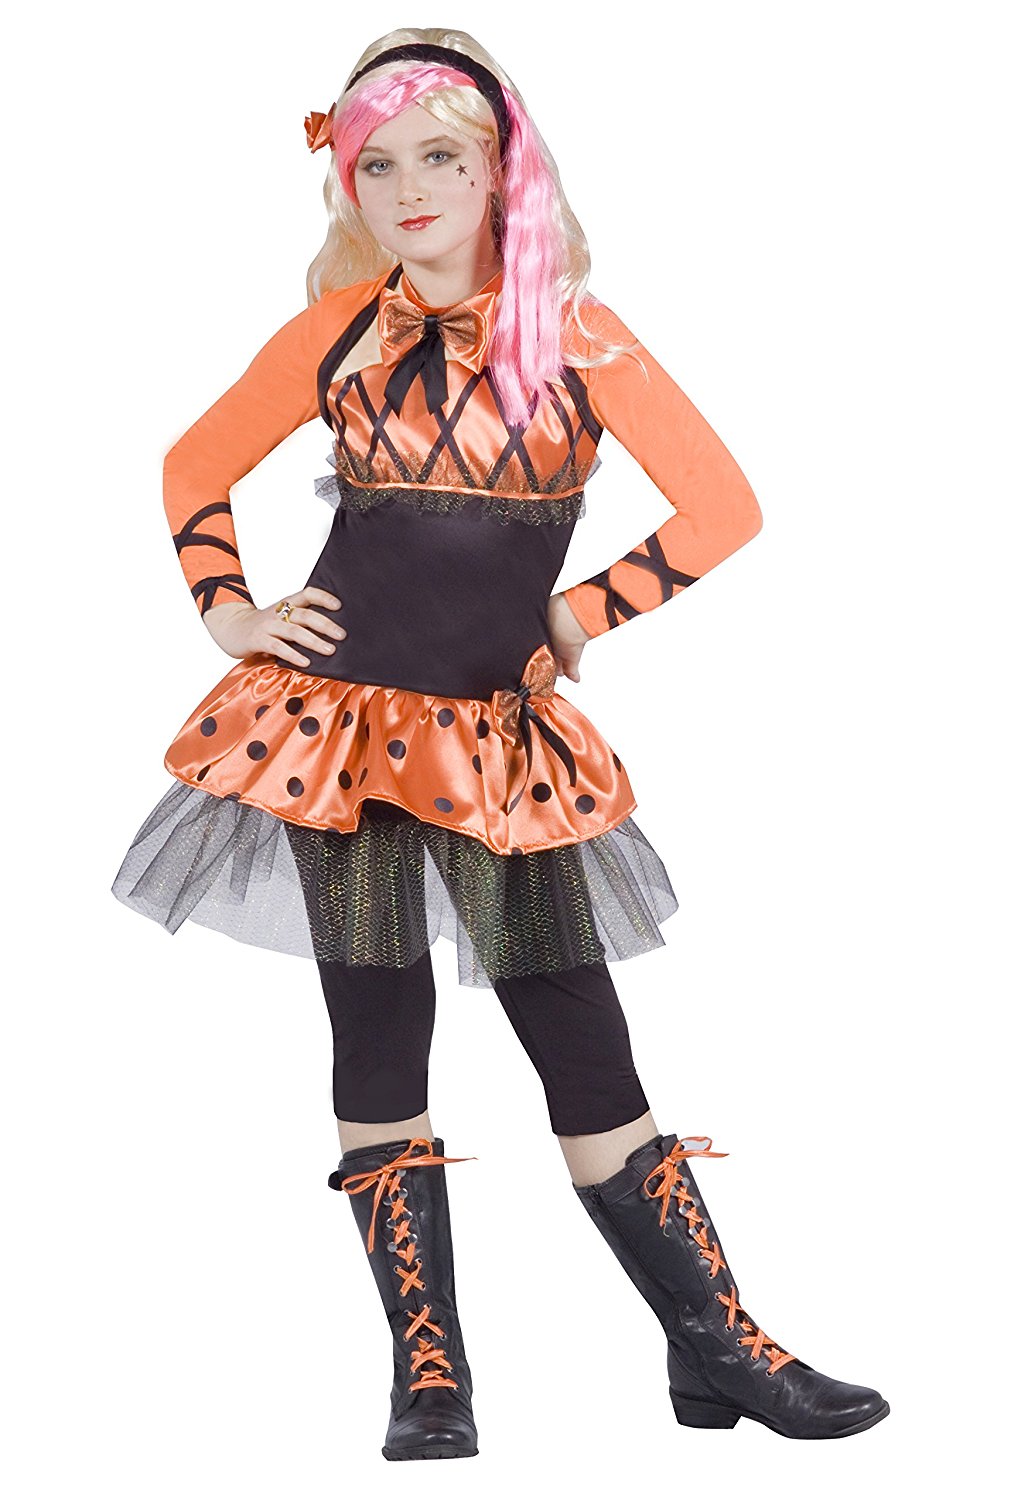 Are you ready for Halloween in Winx Style? - Winx Club All